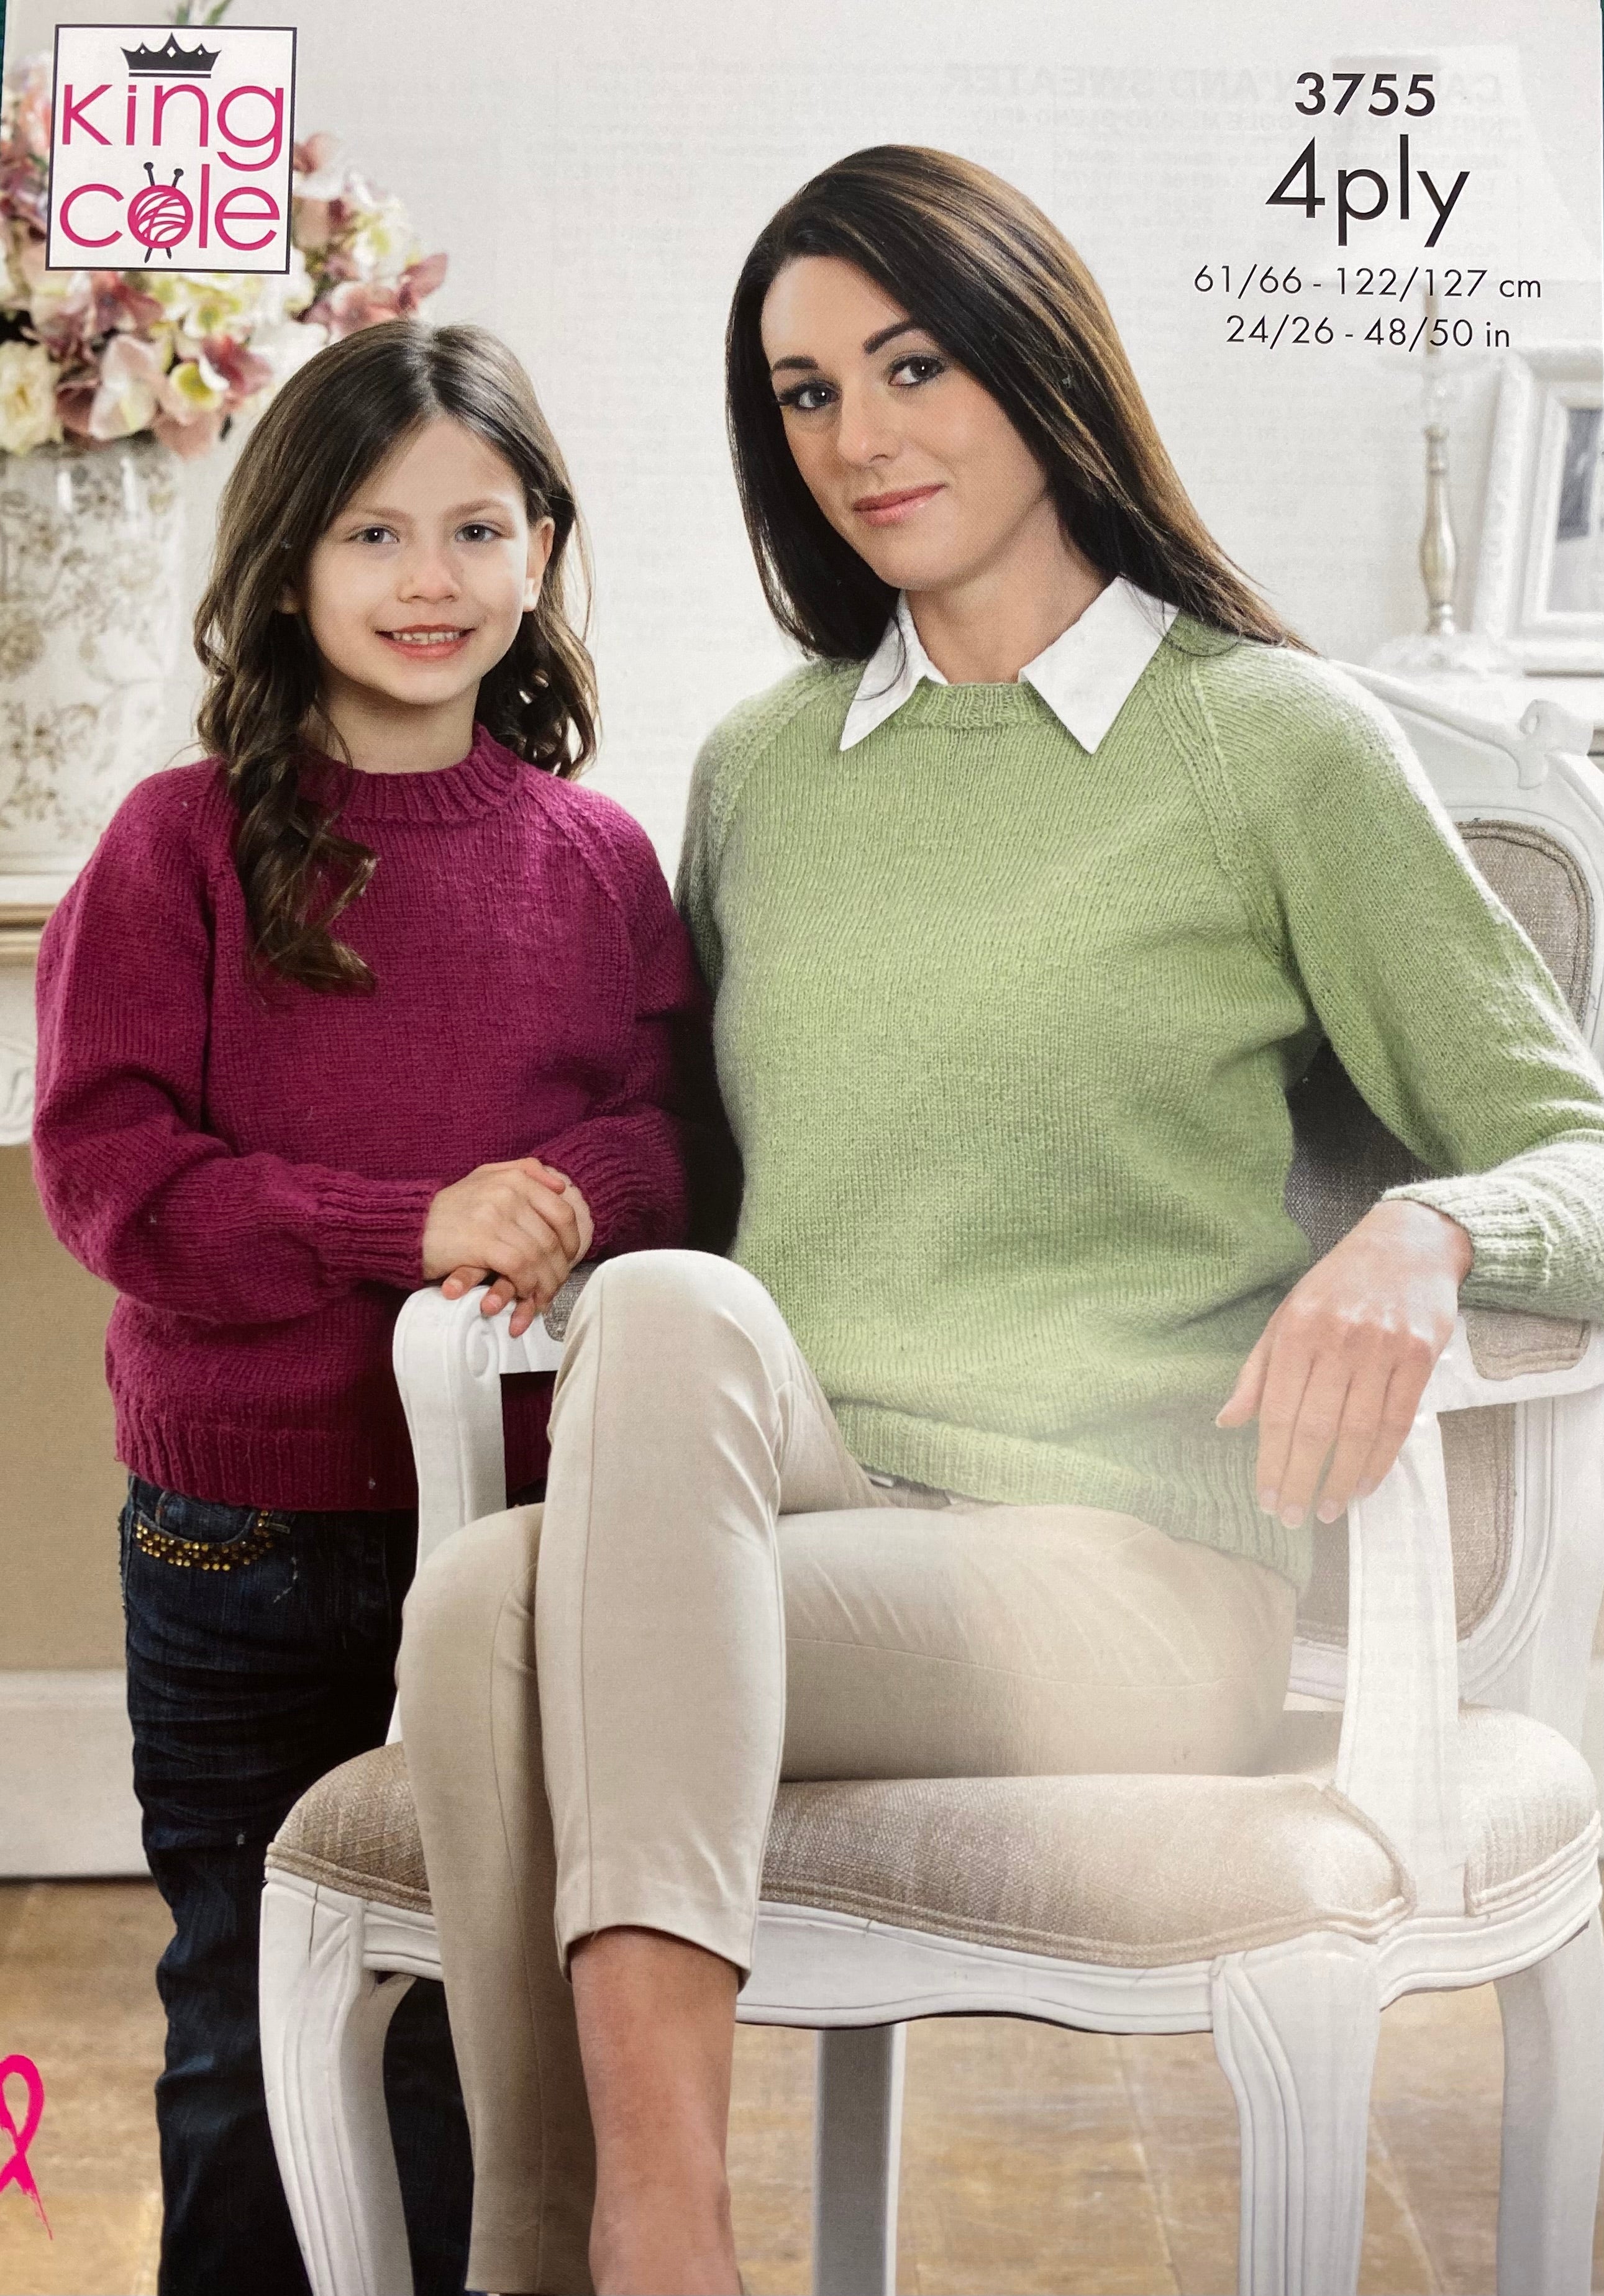 King Cole 3755 - 4ply Raglan Sleeve Cardigan and Sweaters for Children and Adults